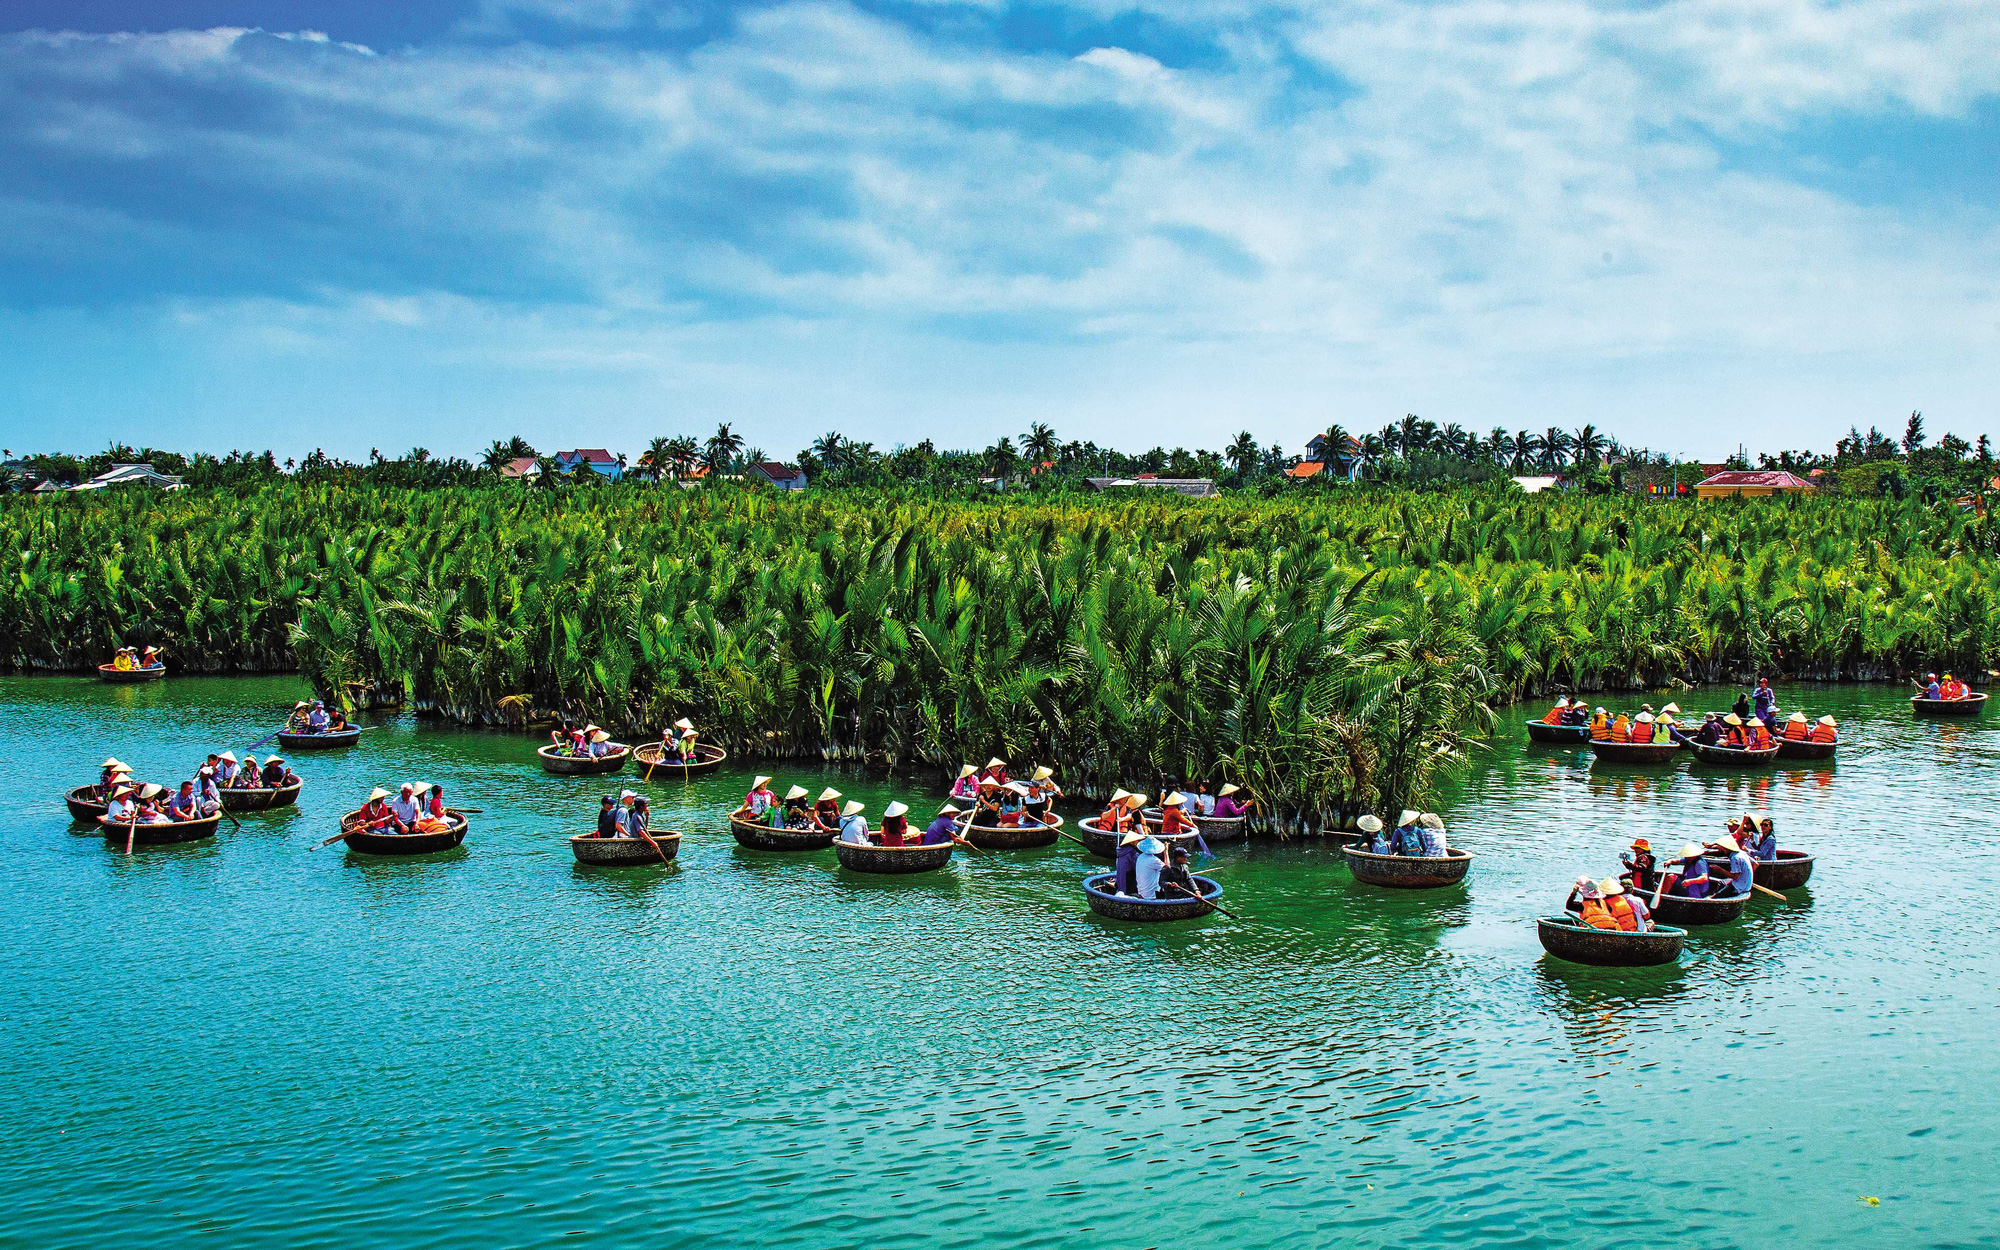 Travel firms contribute to offsetting climate change with tree-planting tours in Hoi An